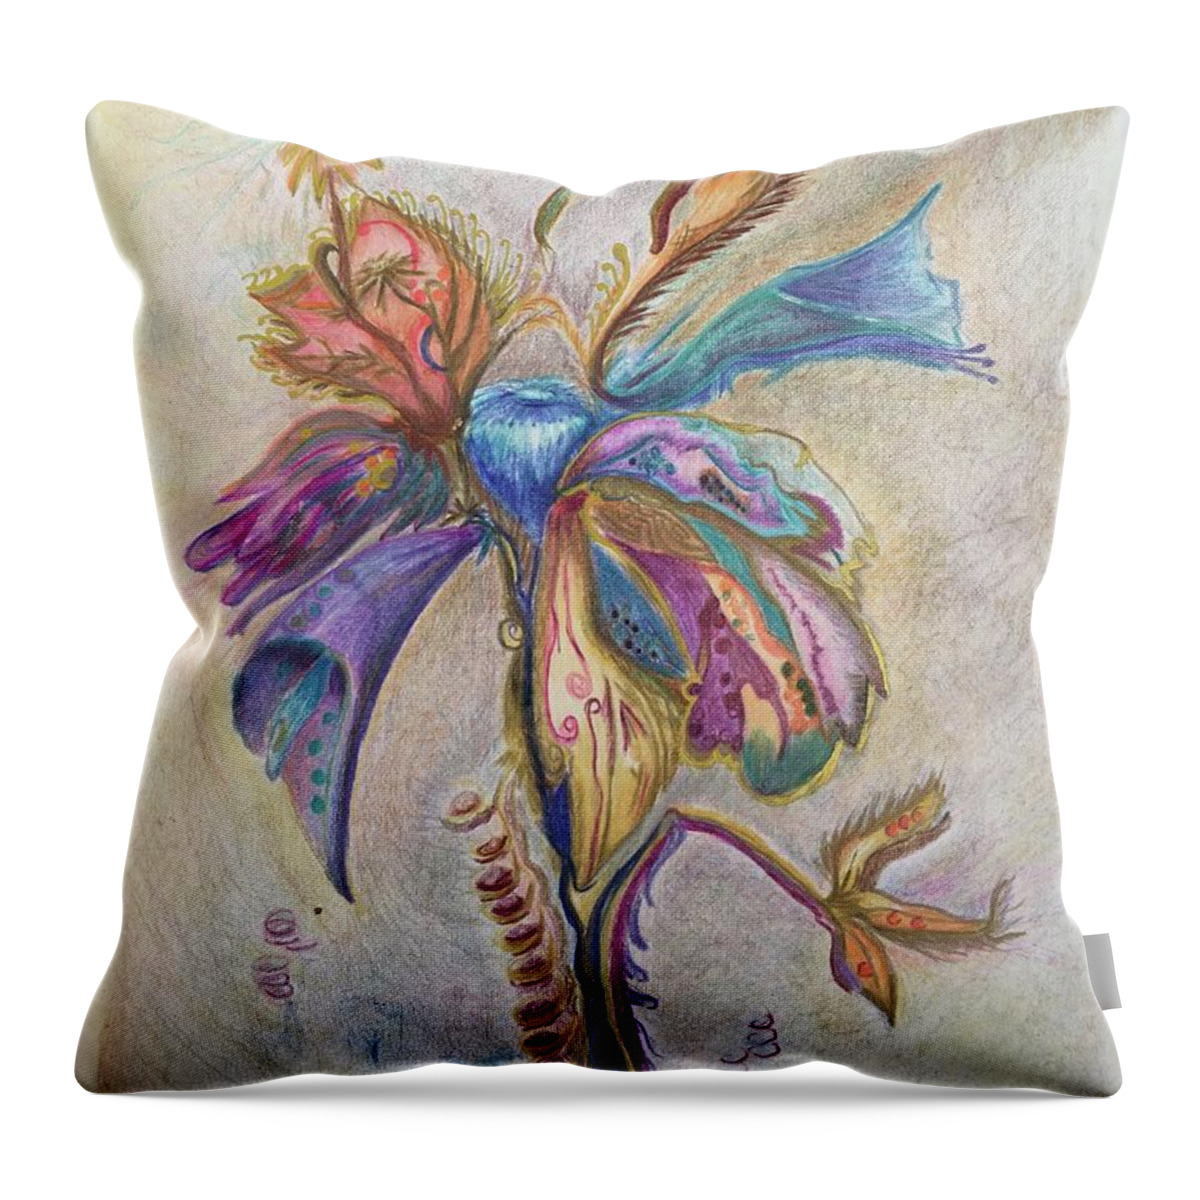 Plants Throw Pillow featuring the drawing Surrender by Suzanne Udell Levinger